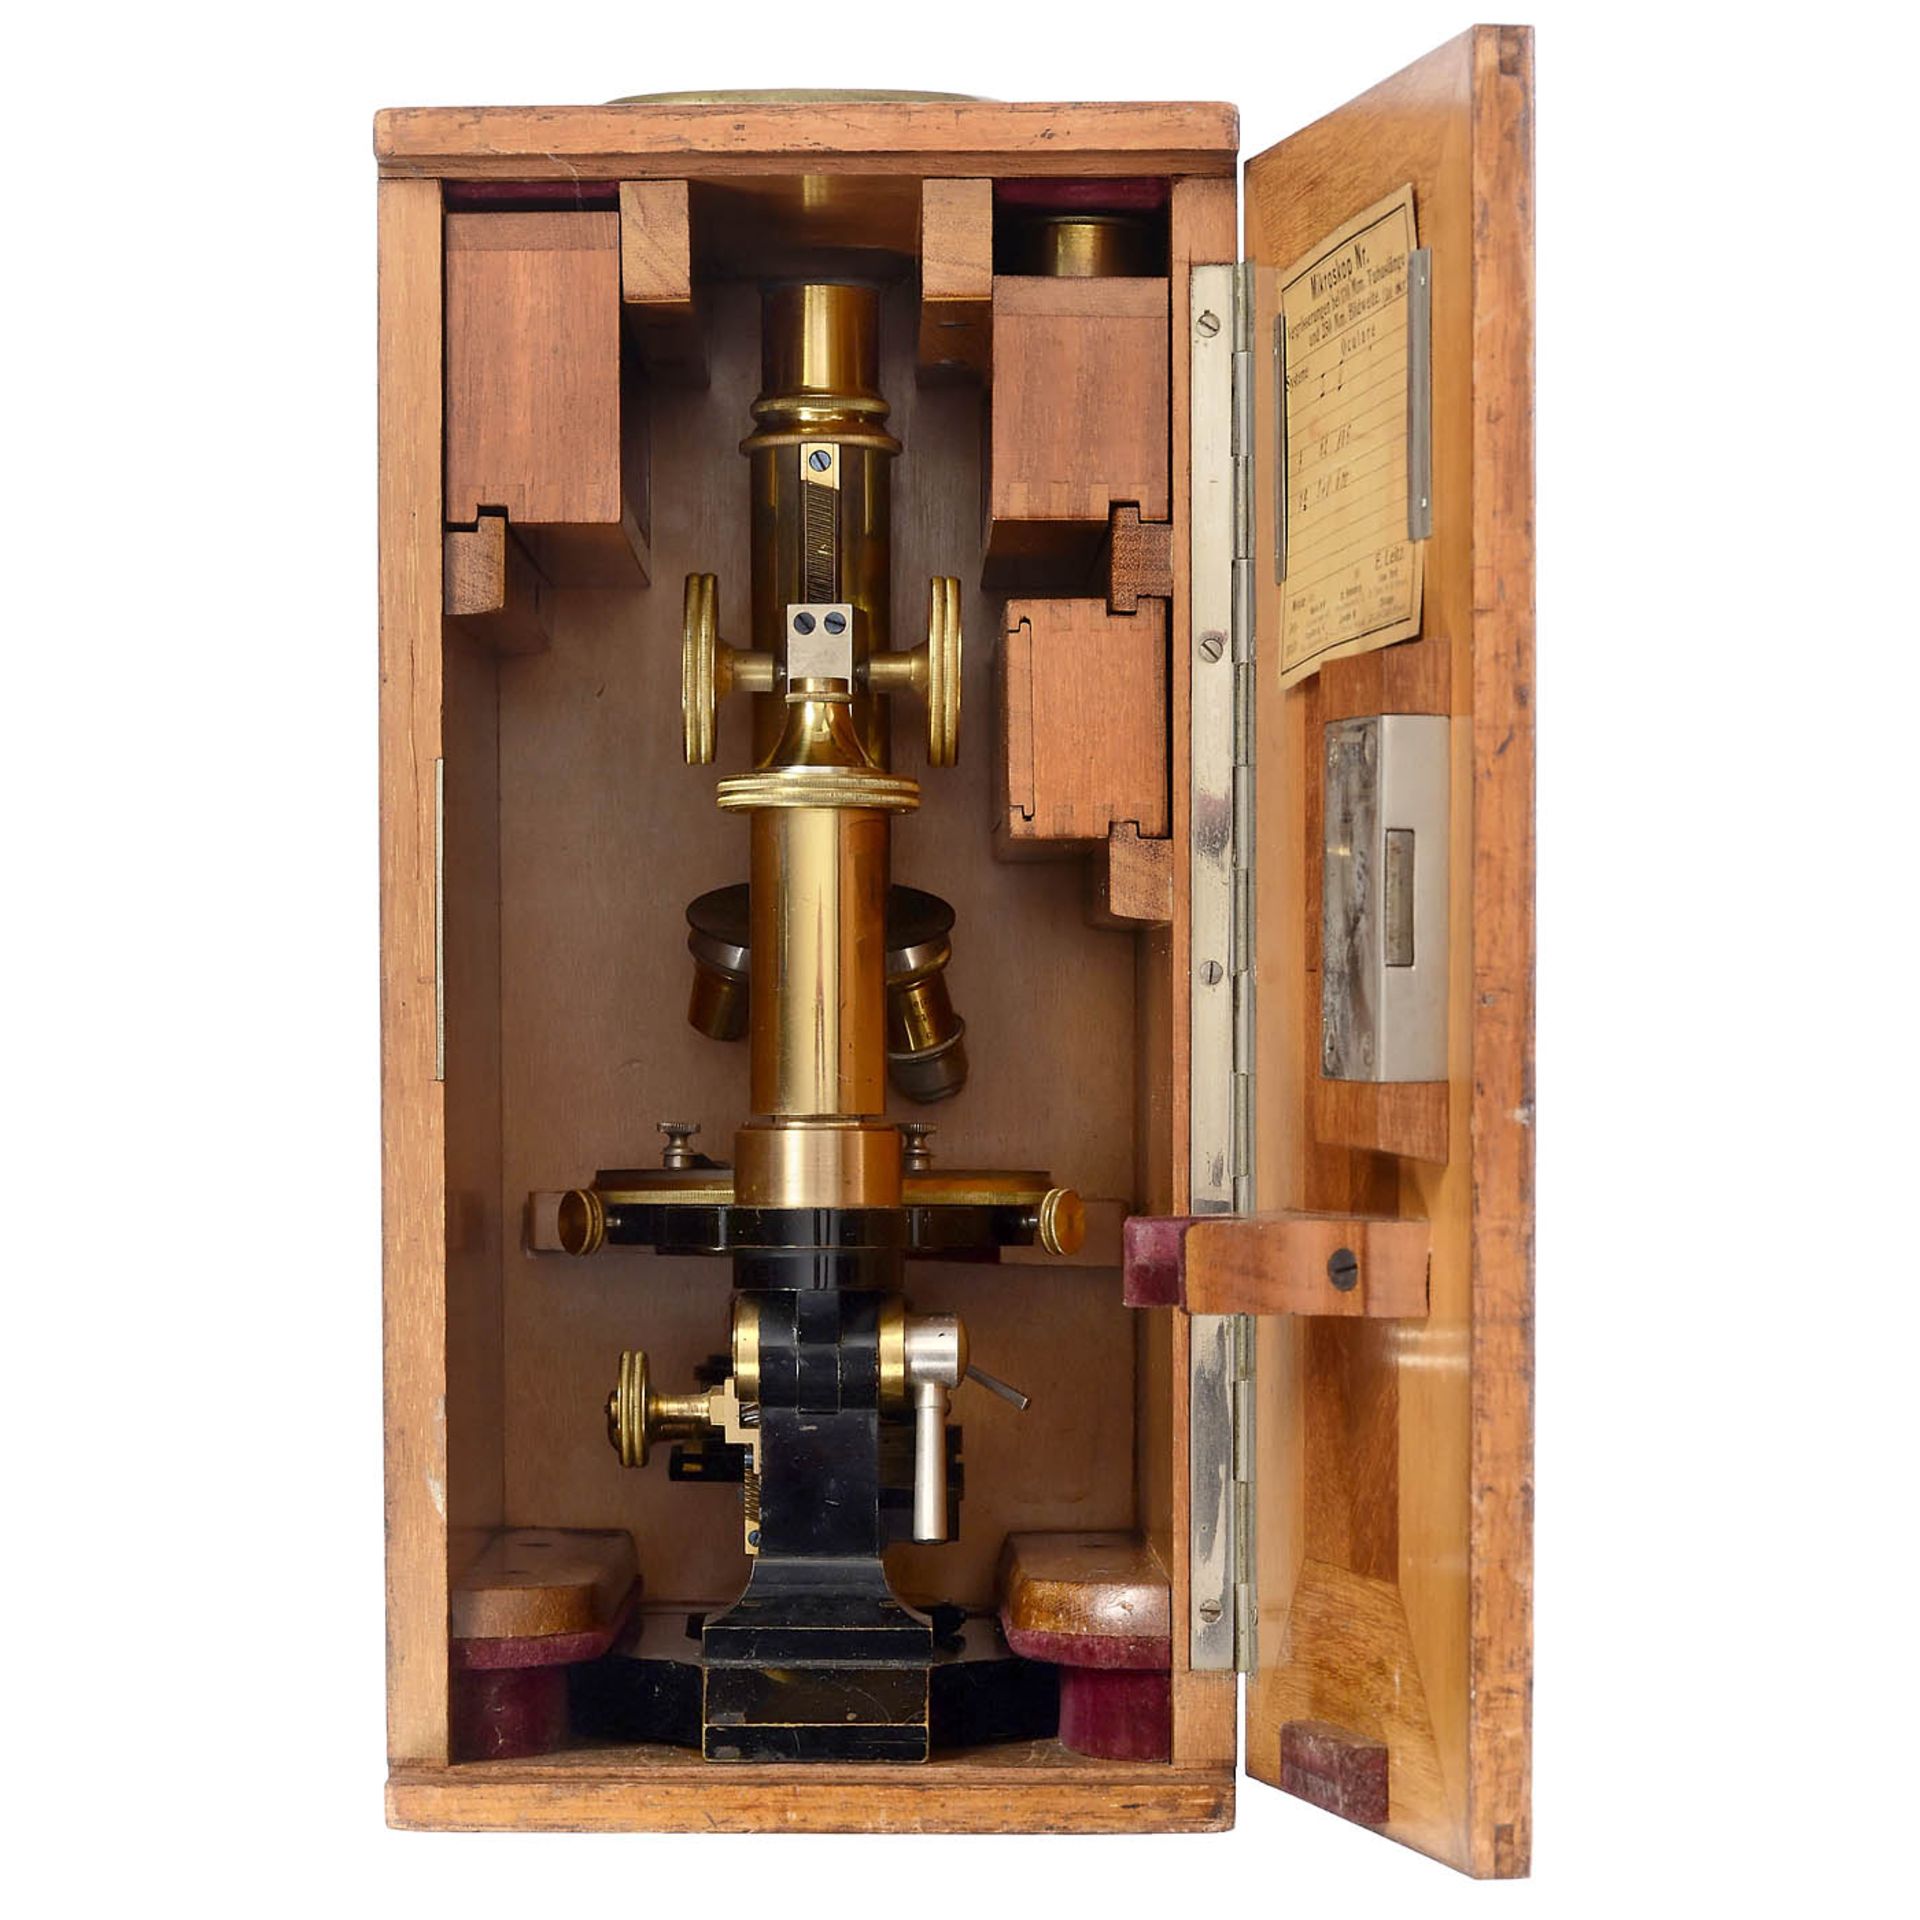 Brass Microscope by Leitz, c. 1908 - Image 2 of 2